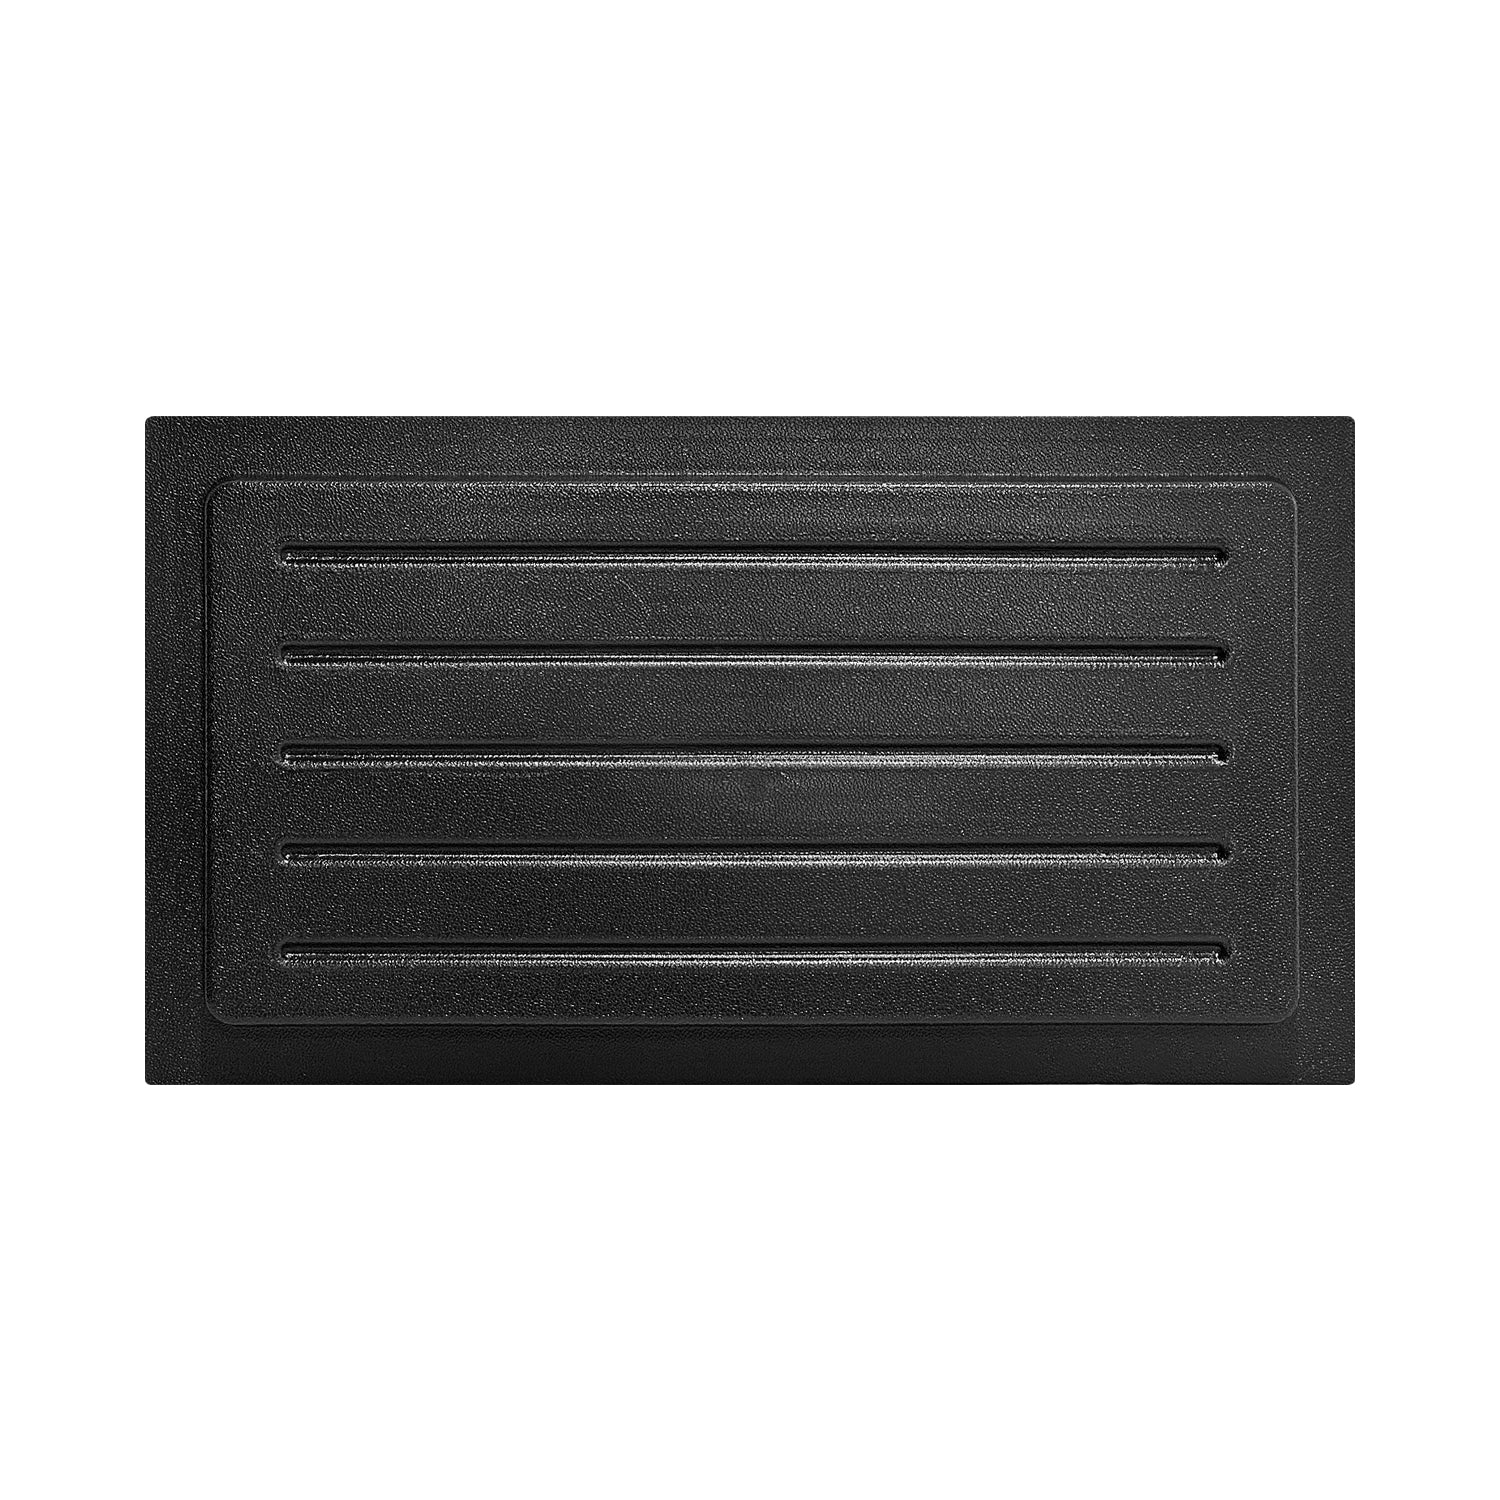 Small outward mounted vent cover (black)